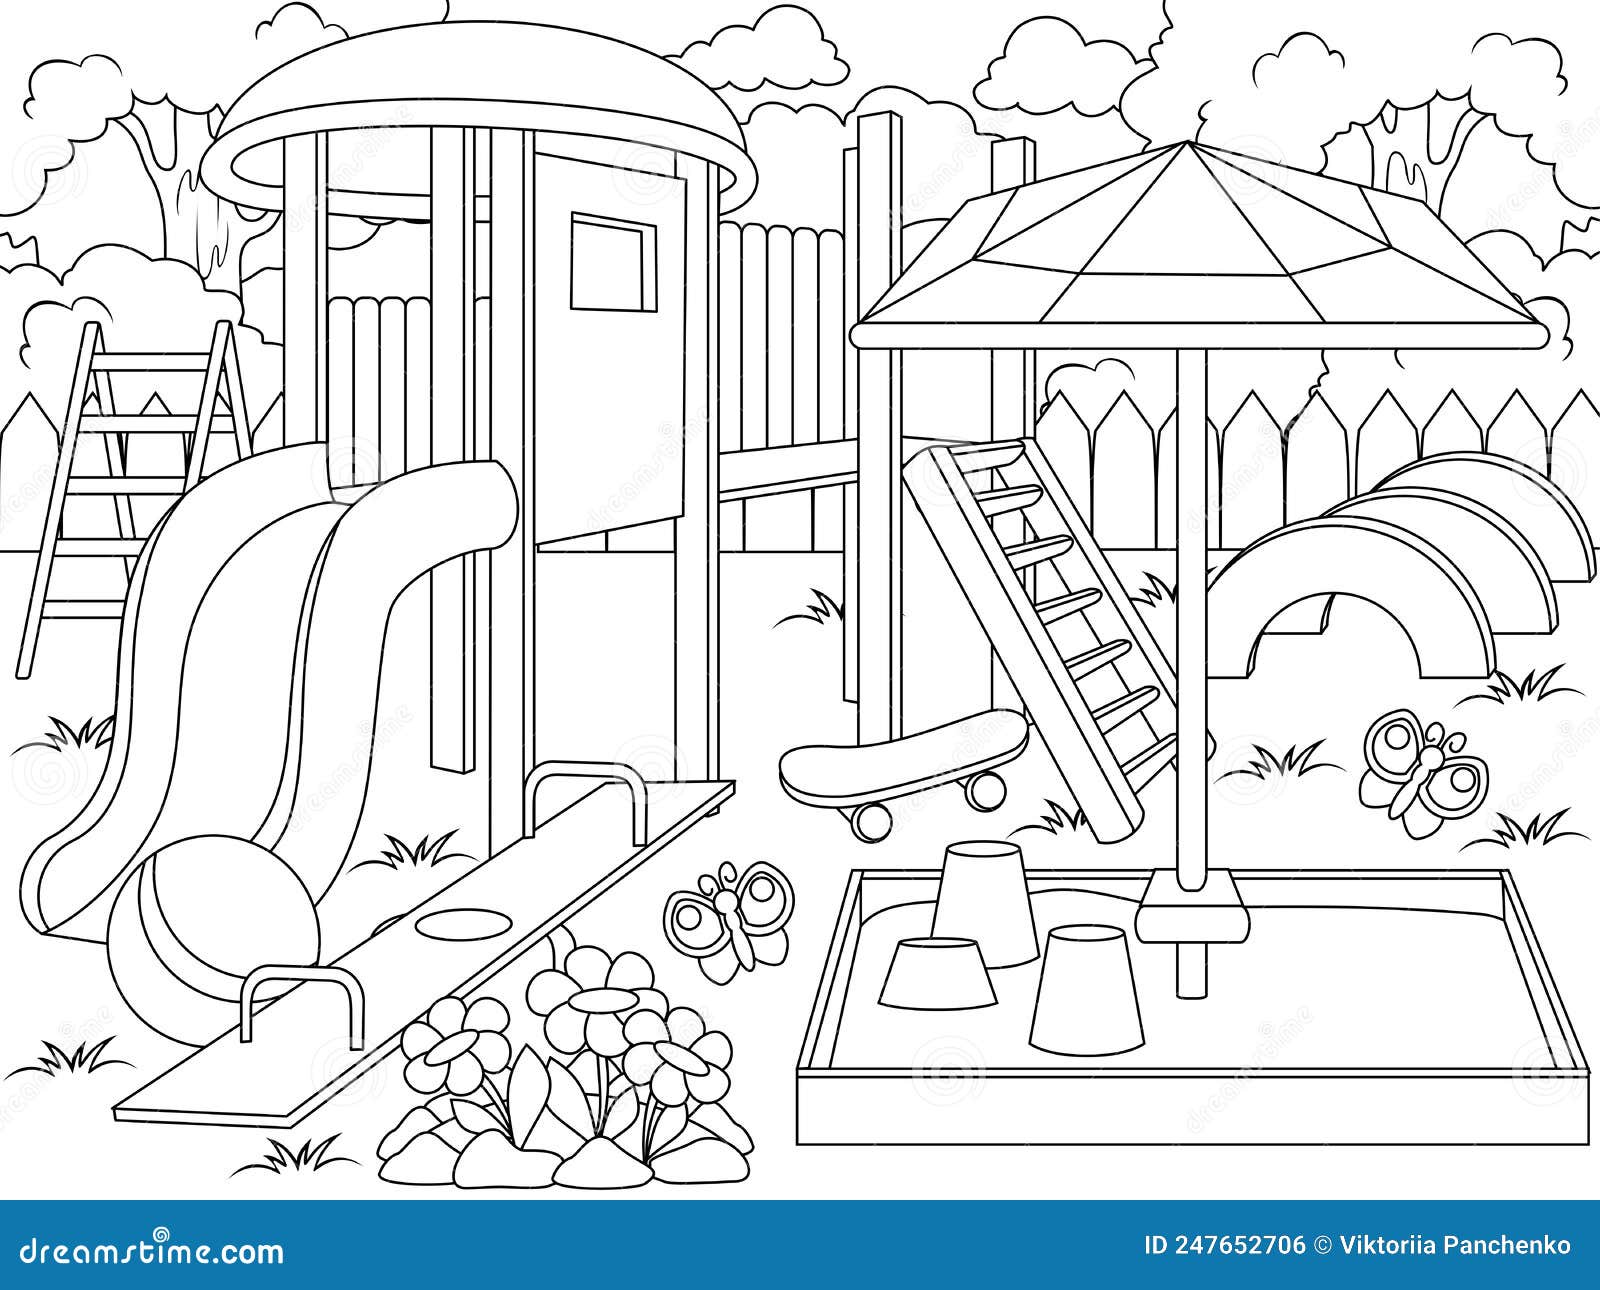 playground-coloring-book-page-animals-cartoon-coloring-page-outline